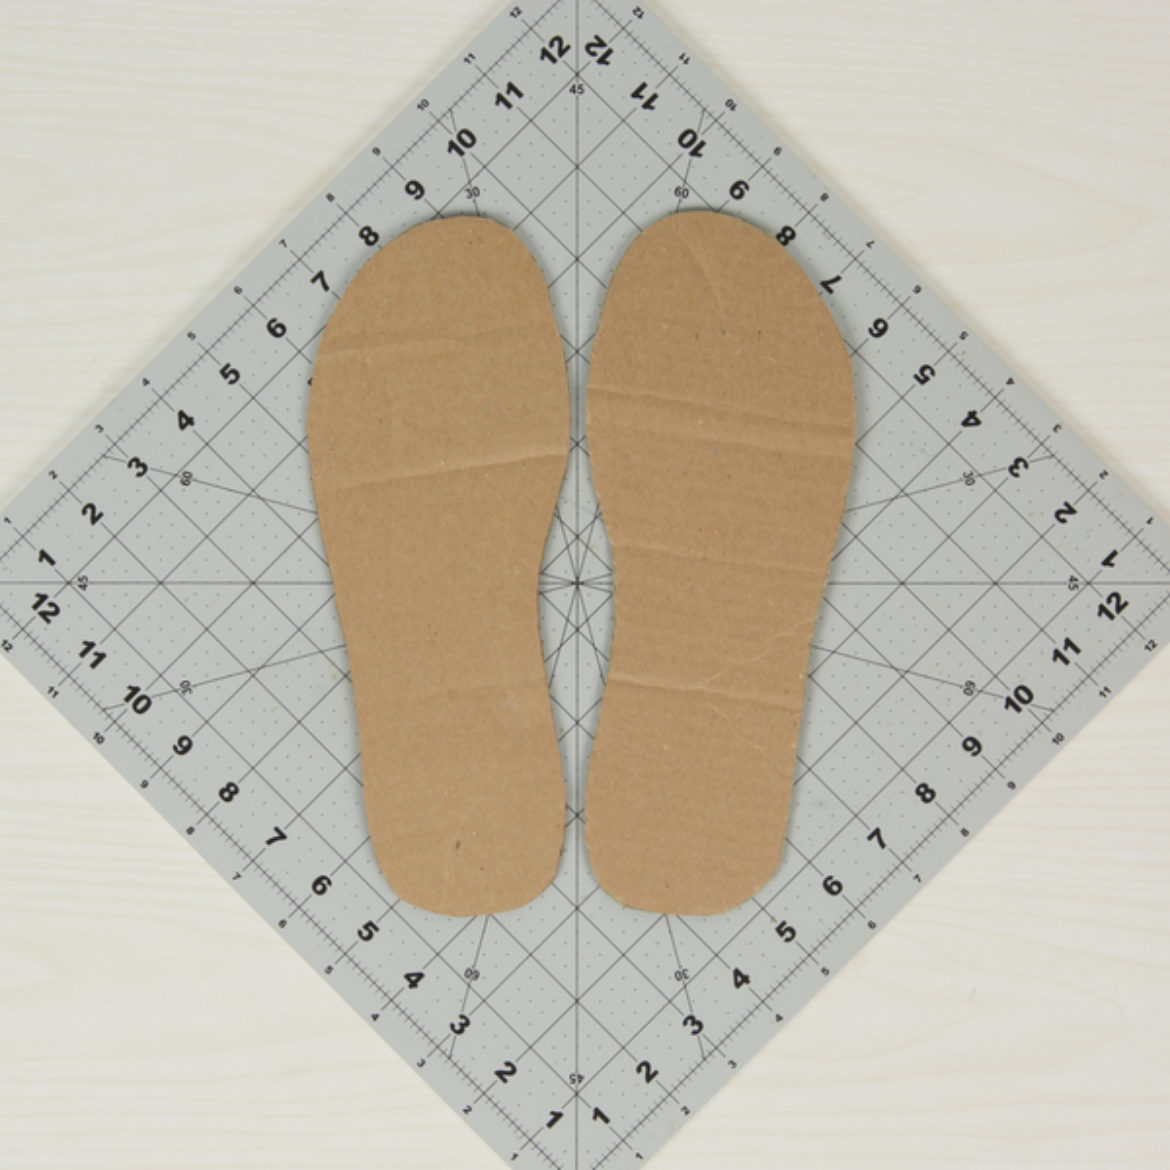 flip flop shape traced onto cardboard and cut out